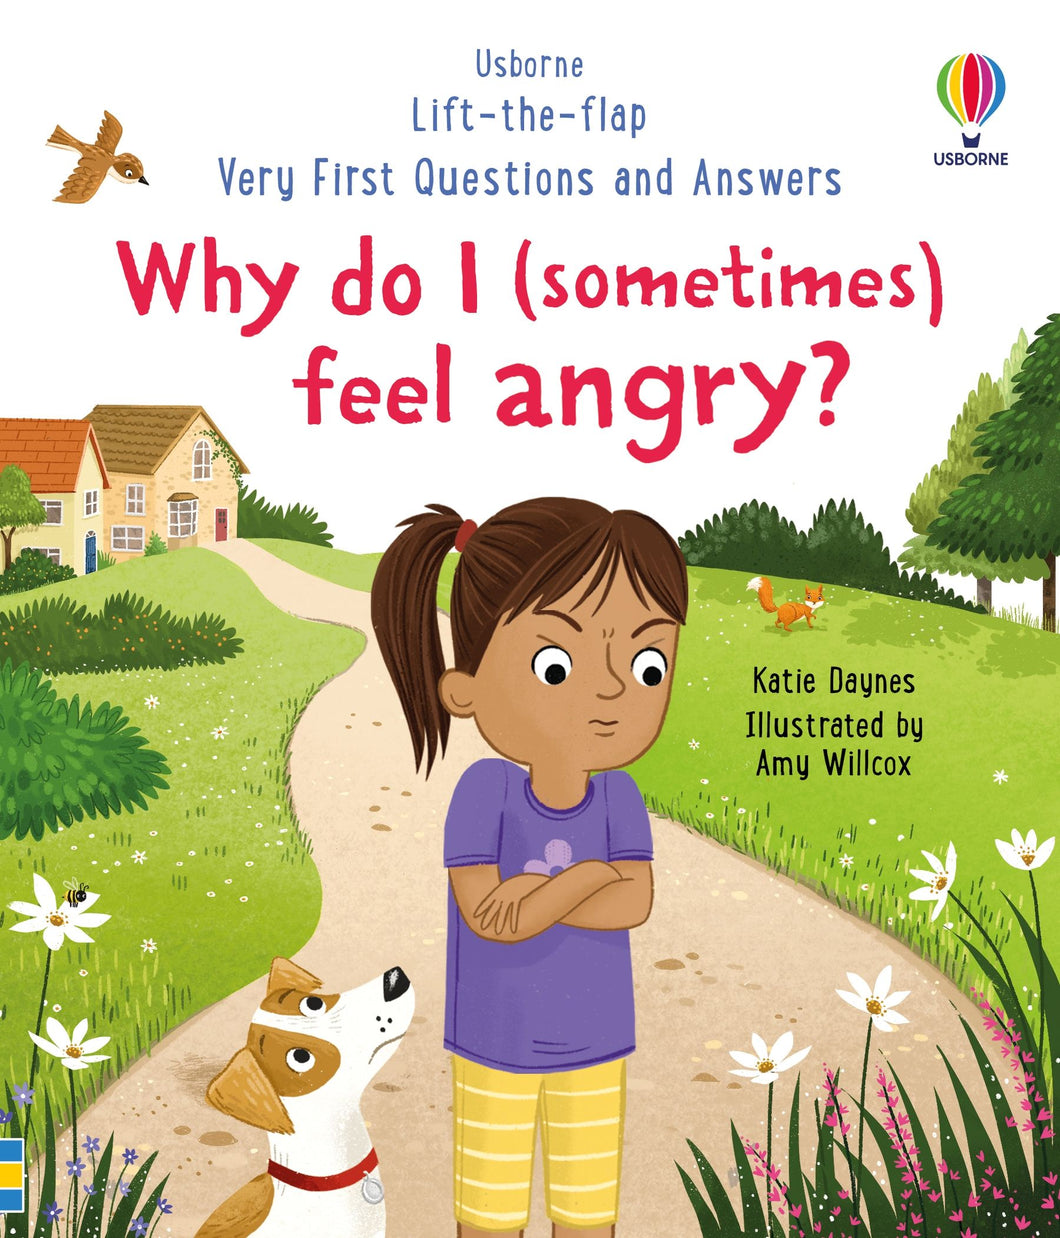 Why do I (sometimes) feel angry?